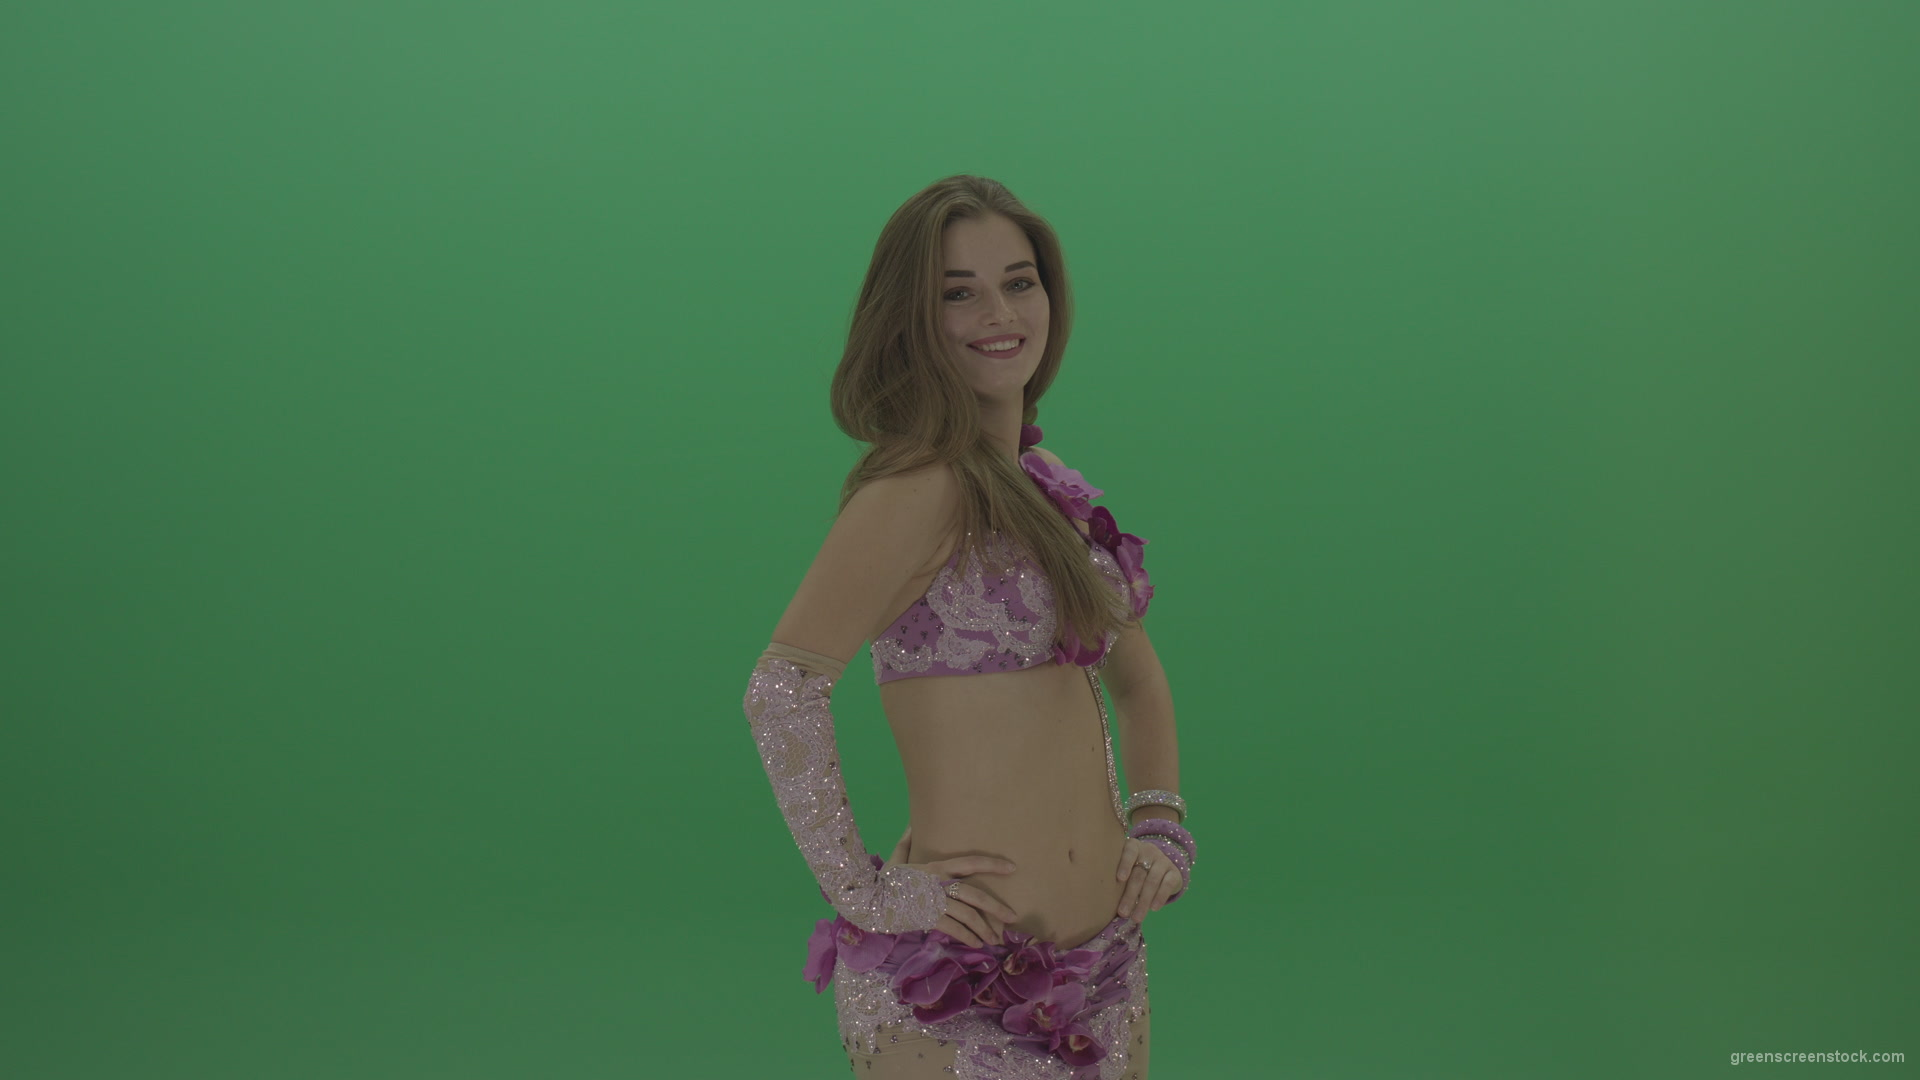 Beautiful-belly-dancer-in-purple-wear-winks-as-she-poses-over-green-screen-background_006 Green Screen Stock